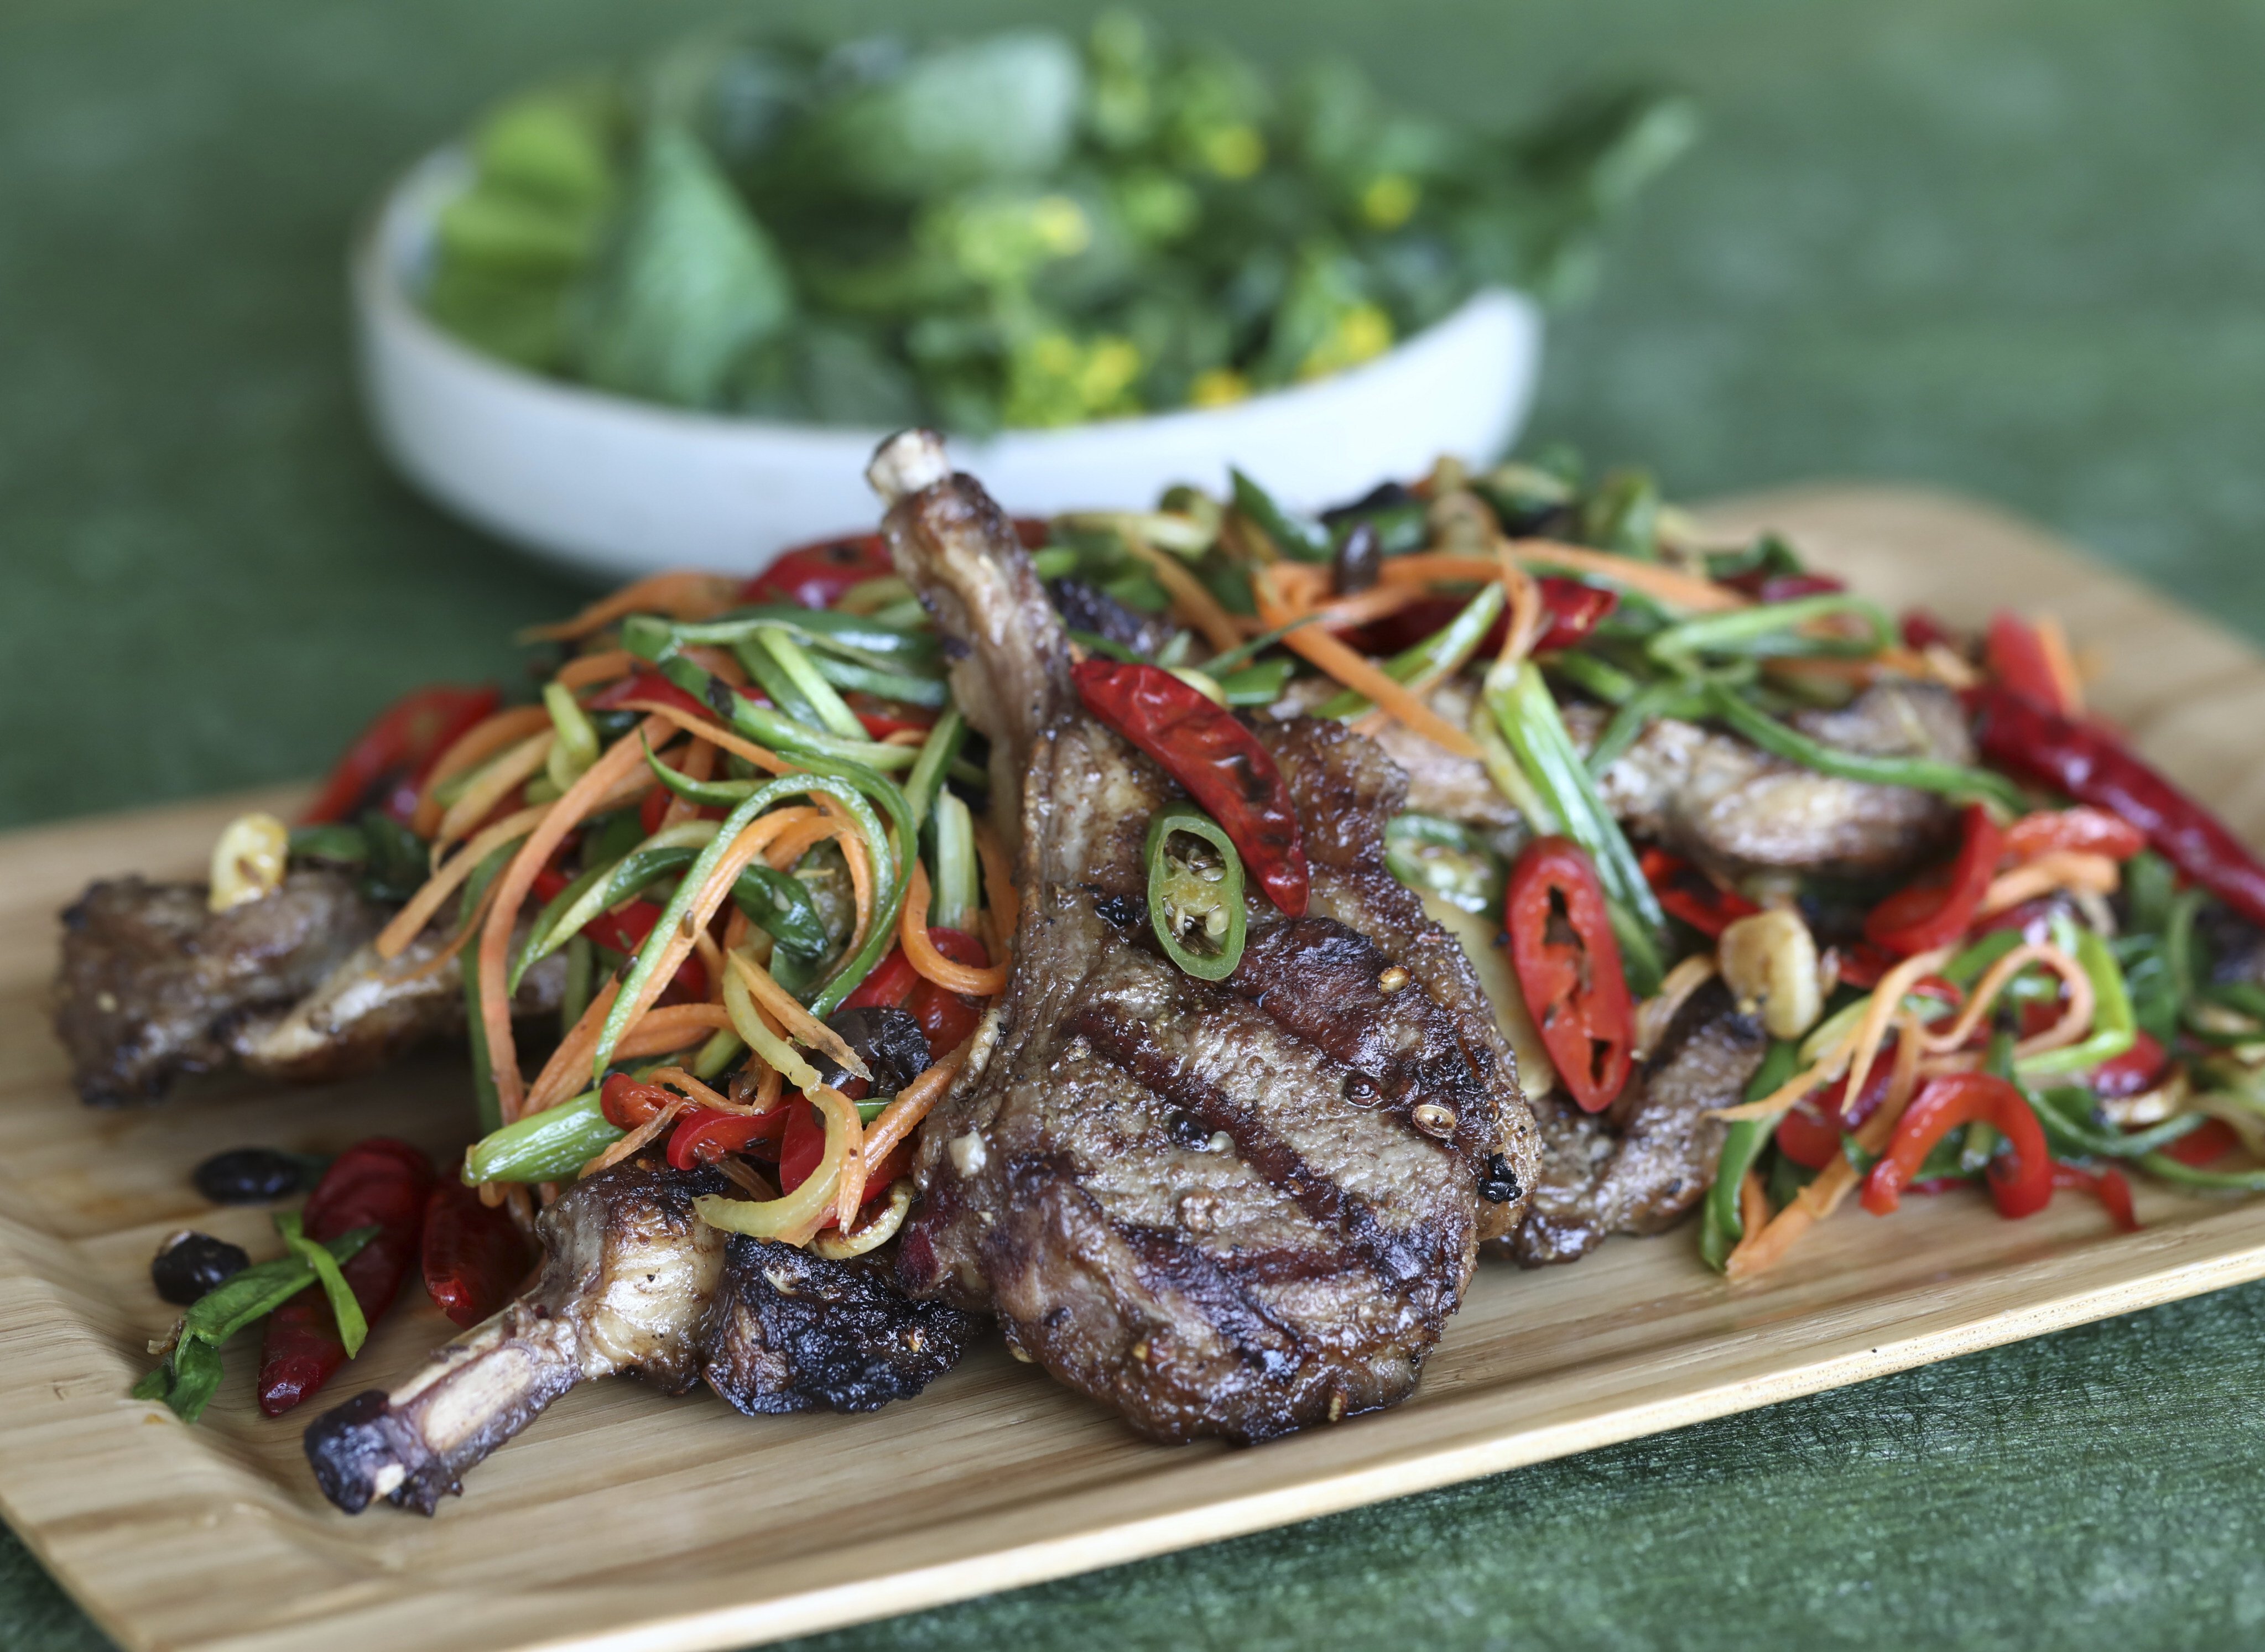 Grilled lamb chops with stir-fried vegetables spicy numbing and full of freshness. Photo: Jonathan Wong